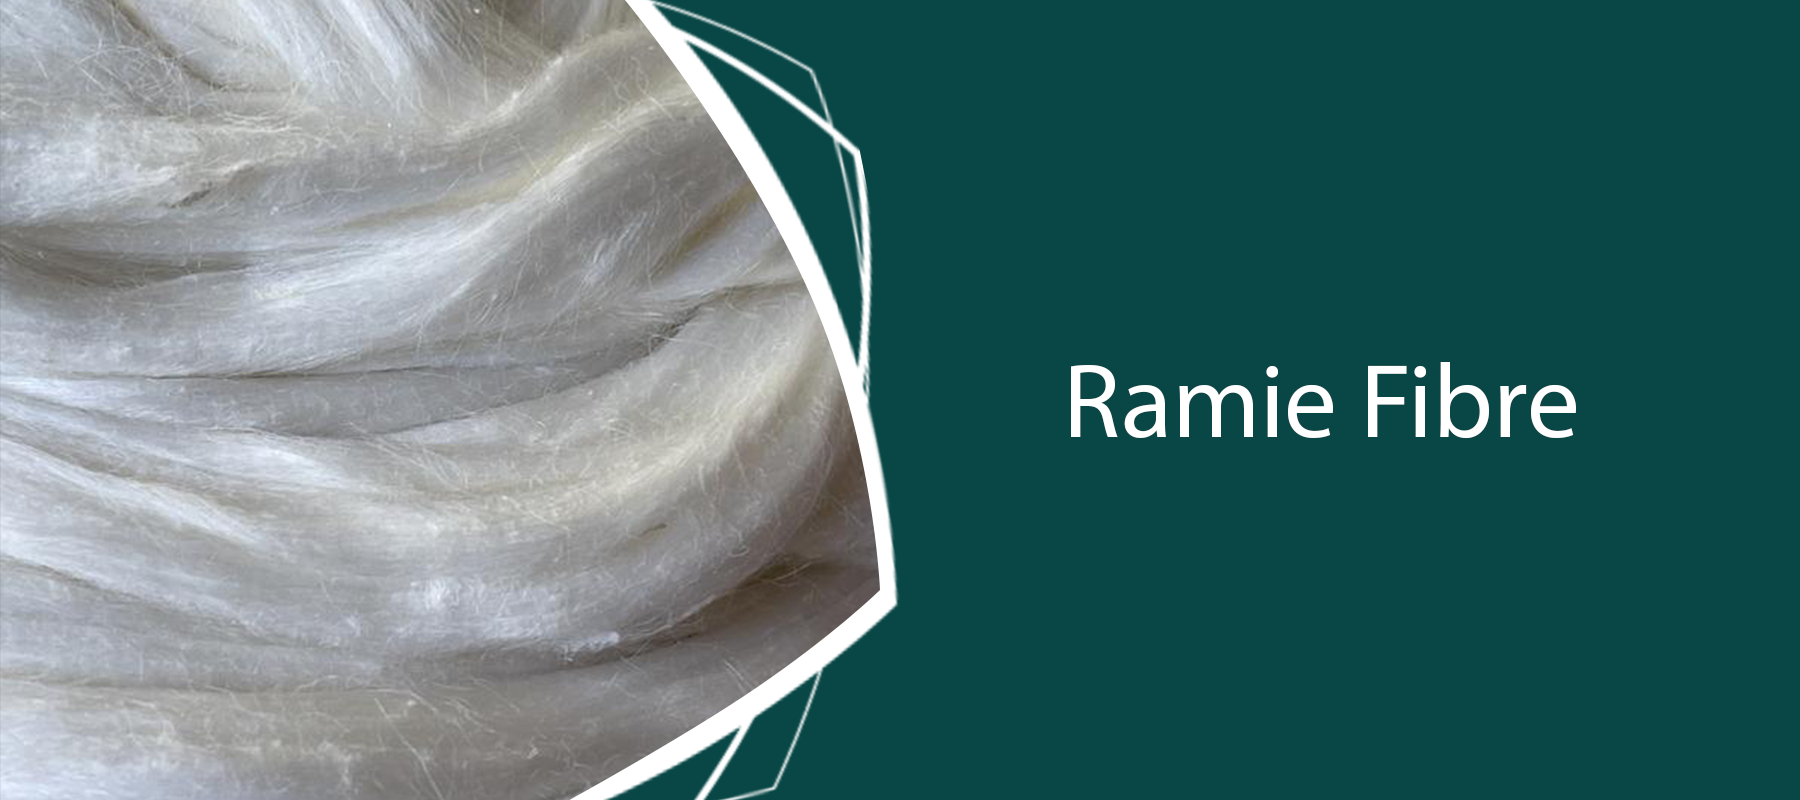 Ramie Fibre Australia: Spinning, Felting and Papermaking